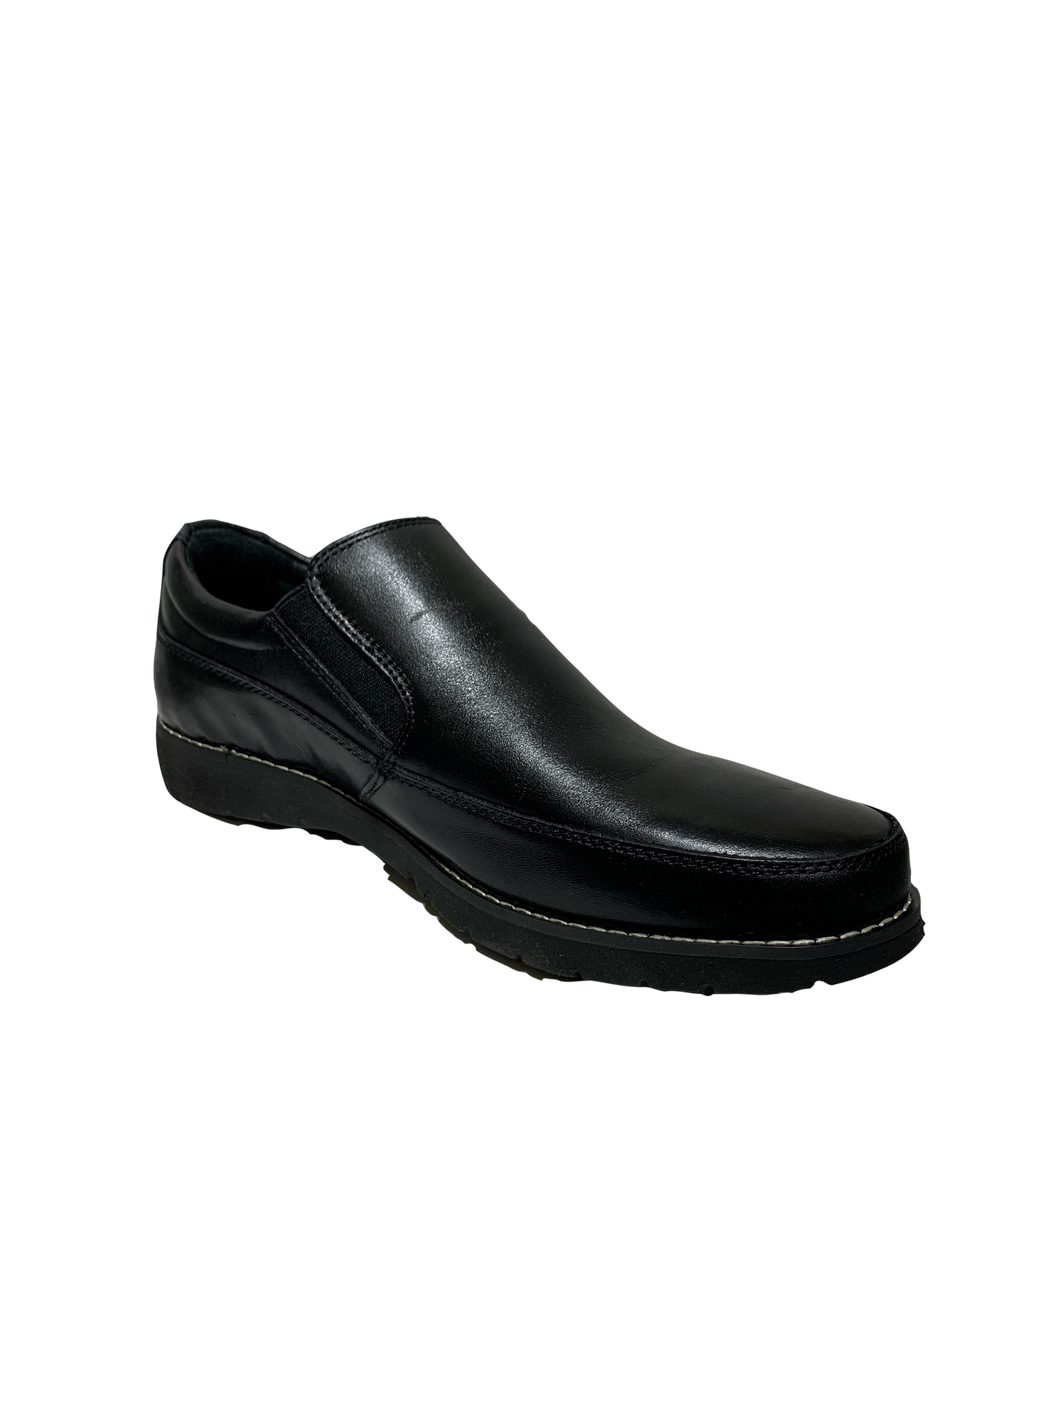 PROPET Slip on loafer - The Mens Shoppe & Her Boutique